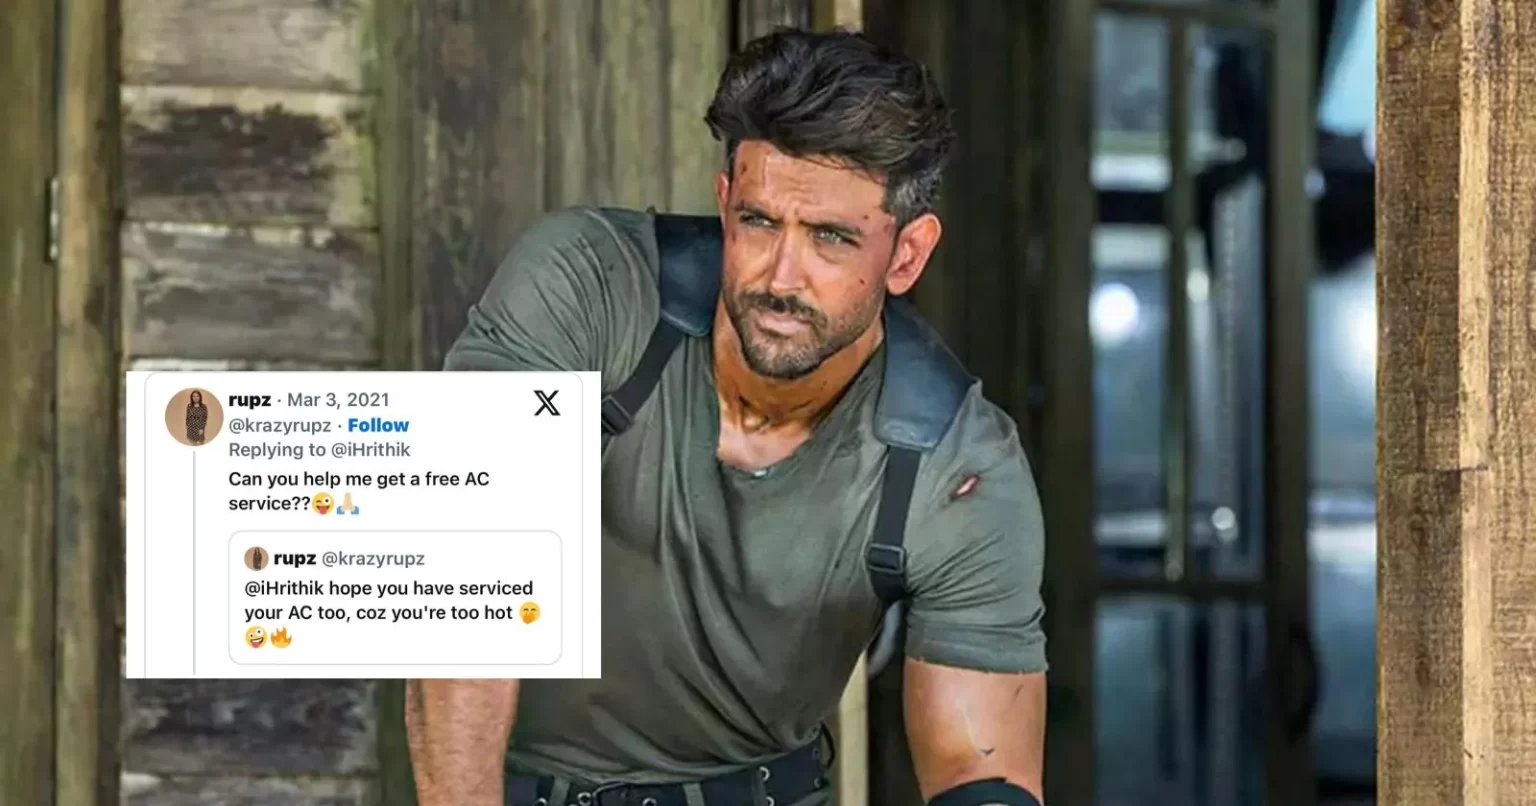 Hrithik Roshan Responds In Twitter To Help A Fan Get Free AC Service